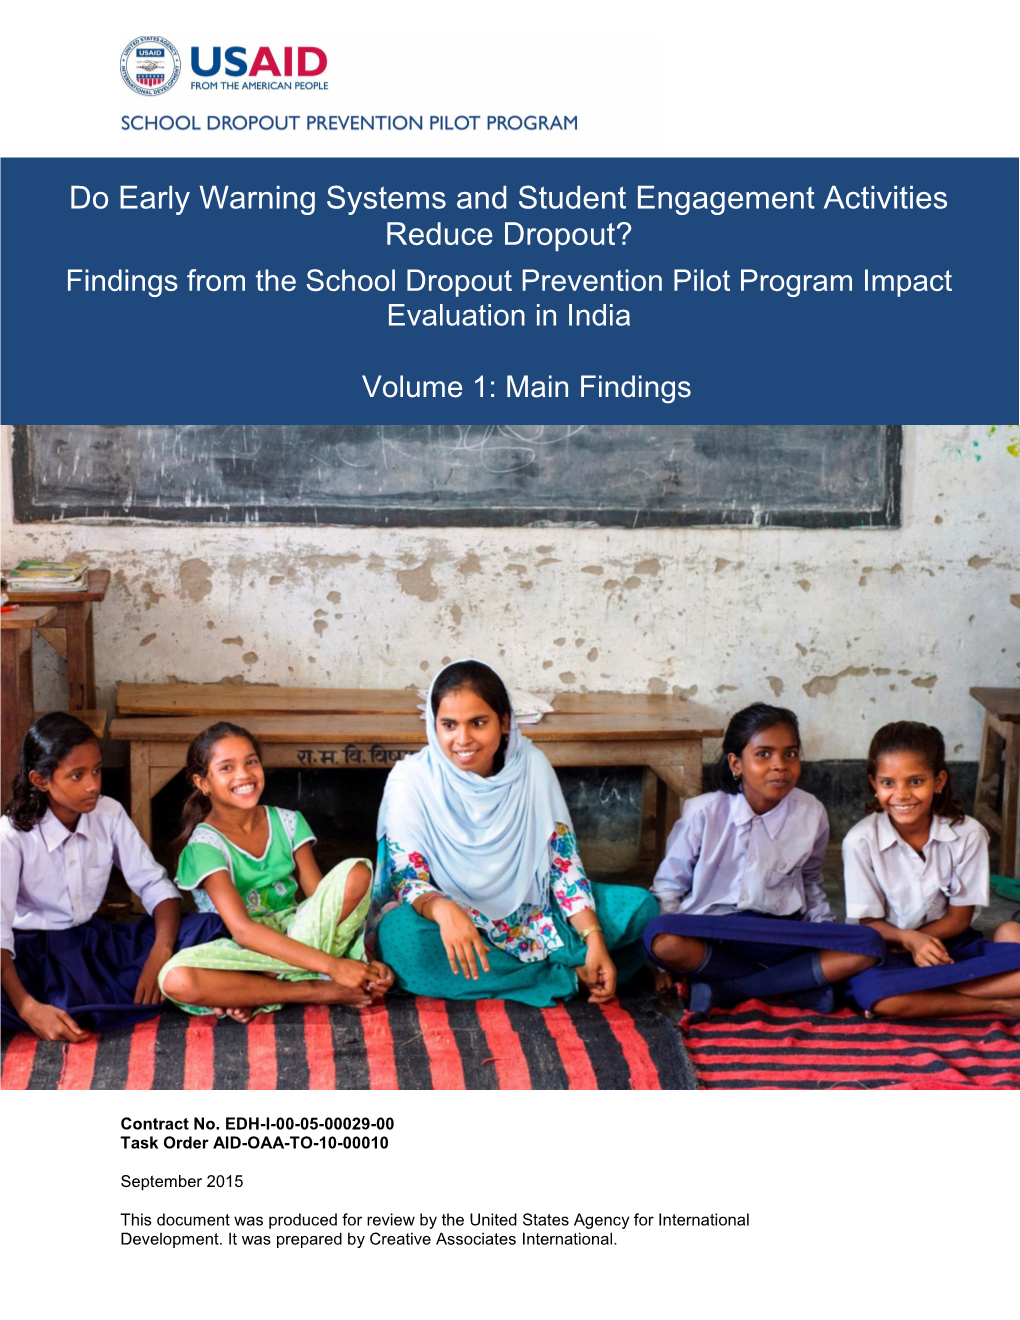 India Findings Report